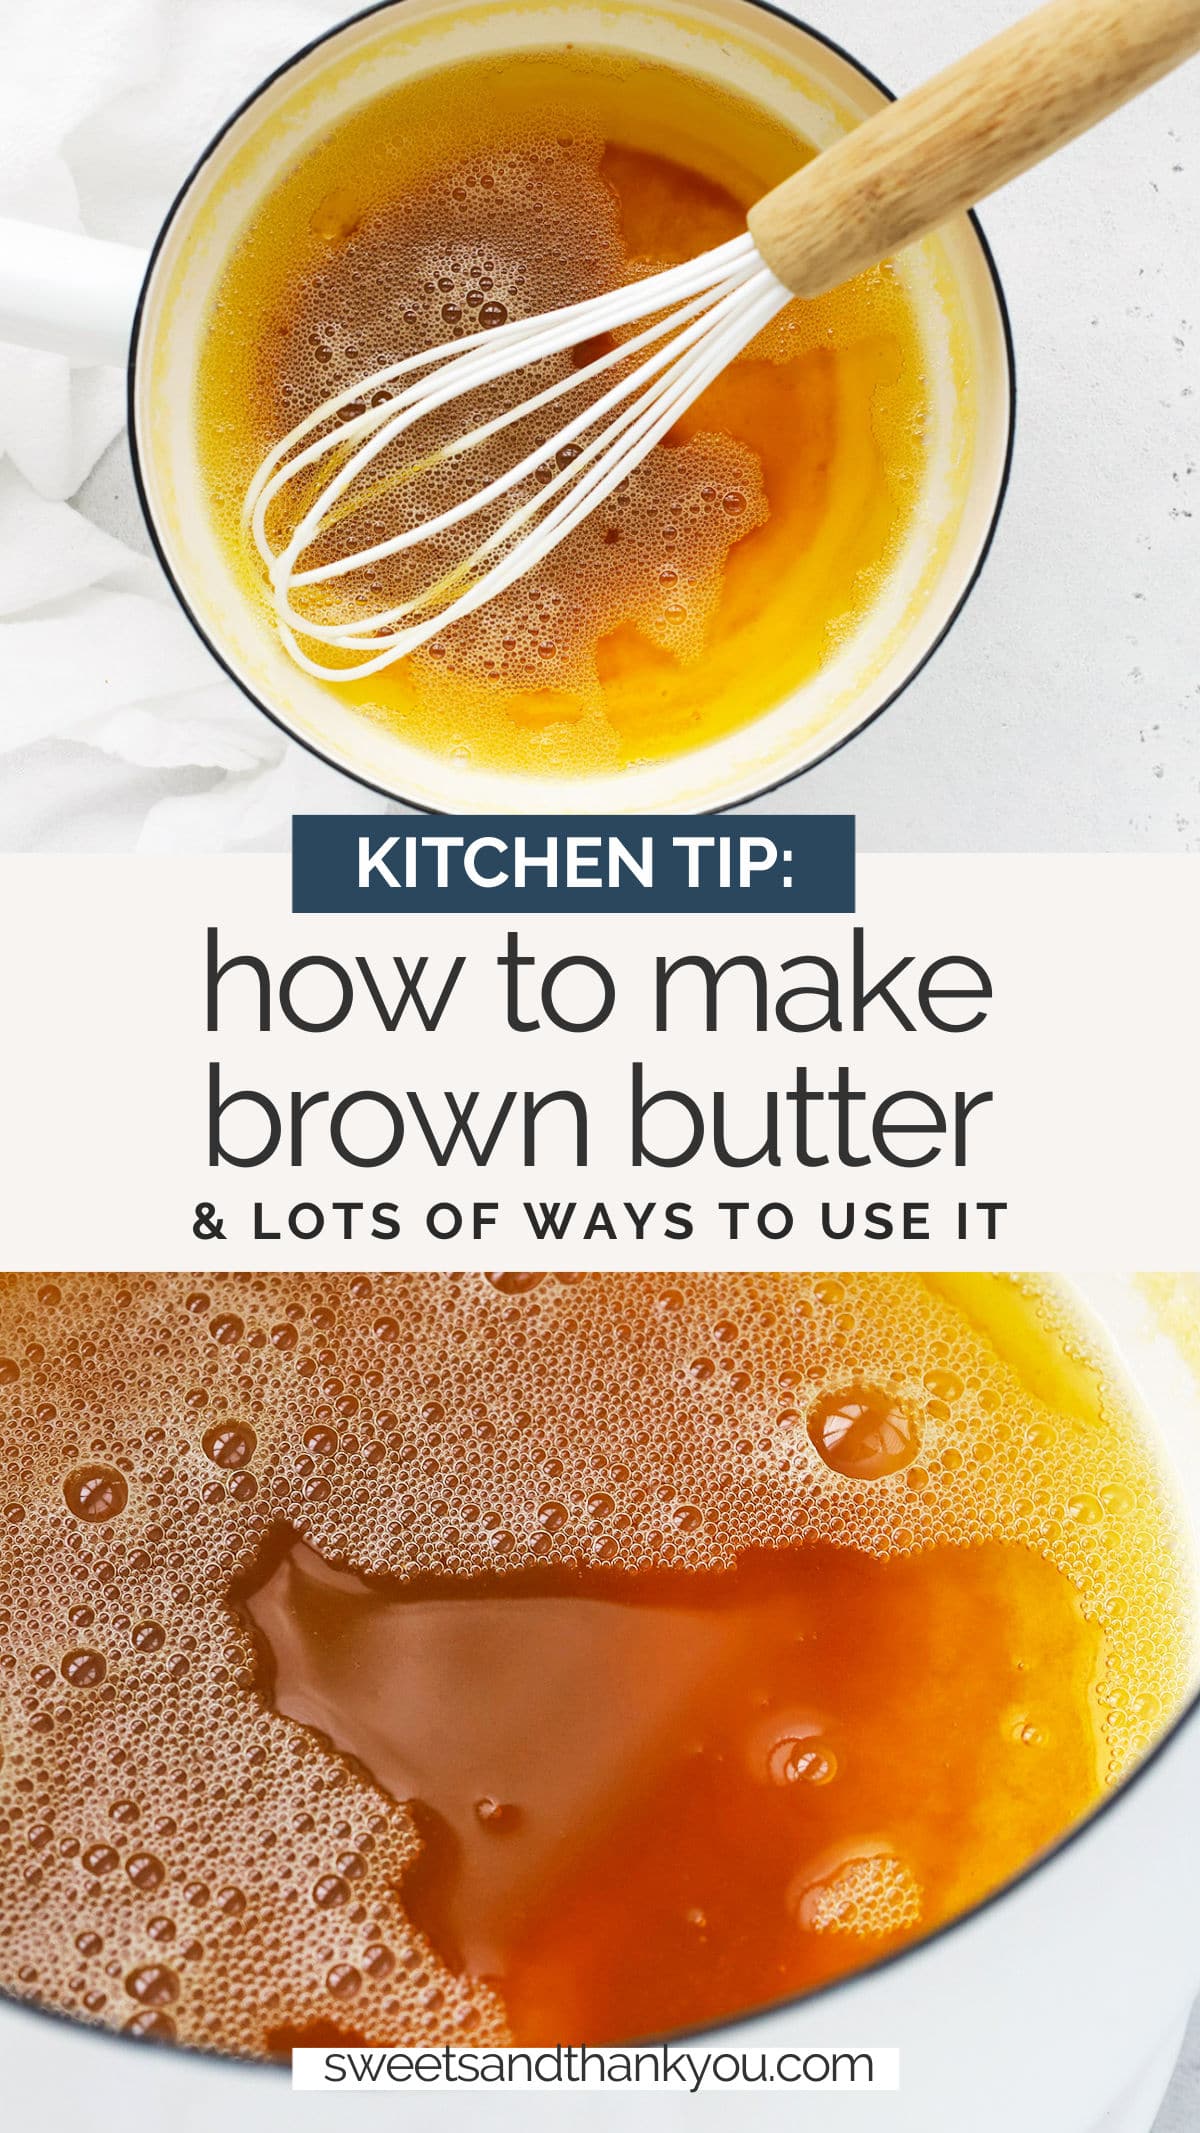 How to Brown Butter - If you've ever wondered how to make brown butter, you're in luck! It's EASY and adds gorgeous flavor to so many recipes. // Brown Butter Tutorial // How to make browned butter // Kitchen Tips // Baking Tips #brownbutter #bakingtip #kitchentip #glutenfree #glutenfreebaking